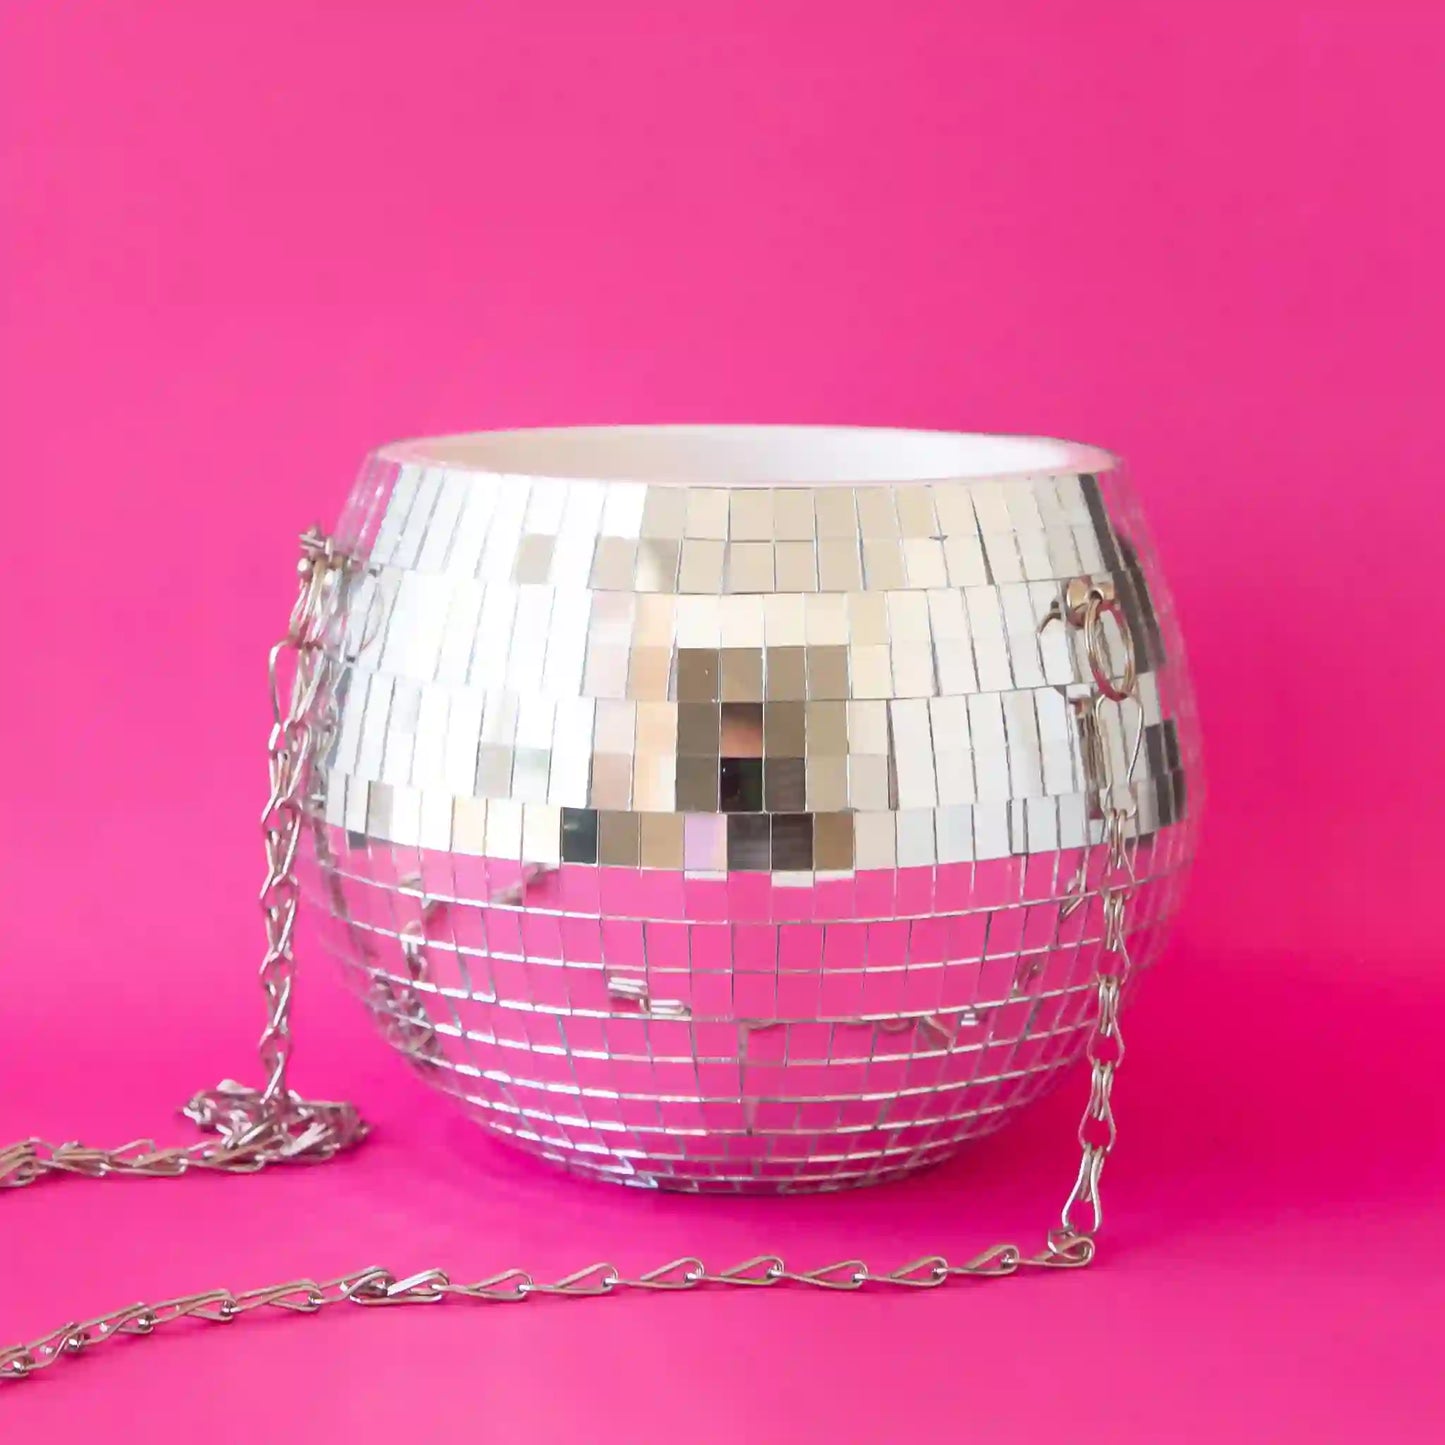 On a hot pink background is a silver mirrored glass disco ball shaped planter with a silver chain hanger.